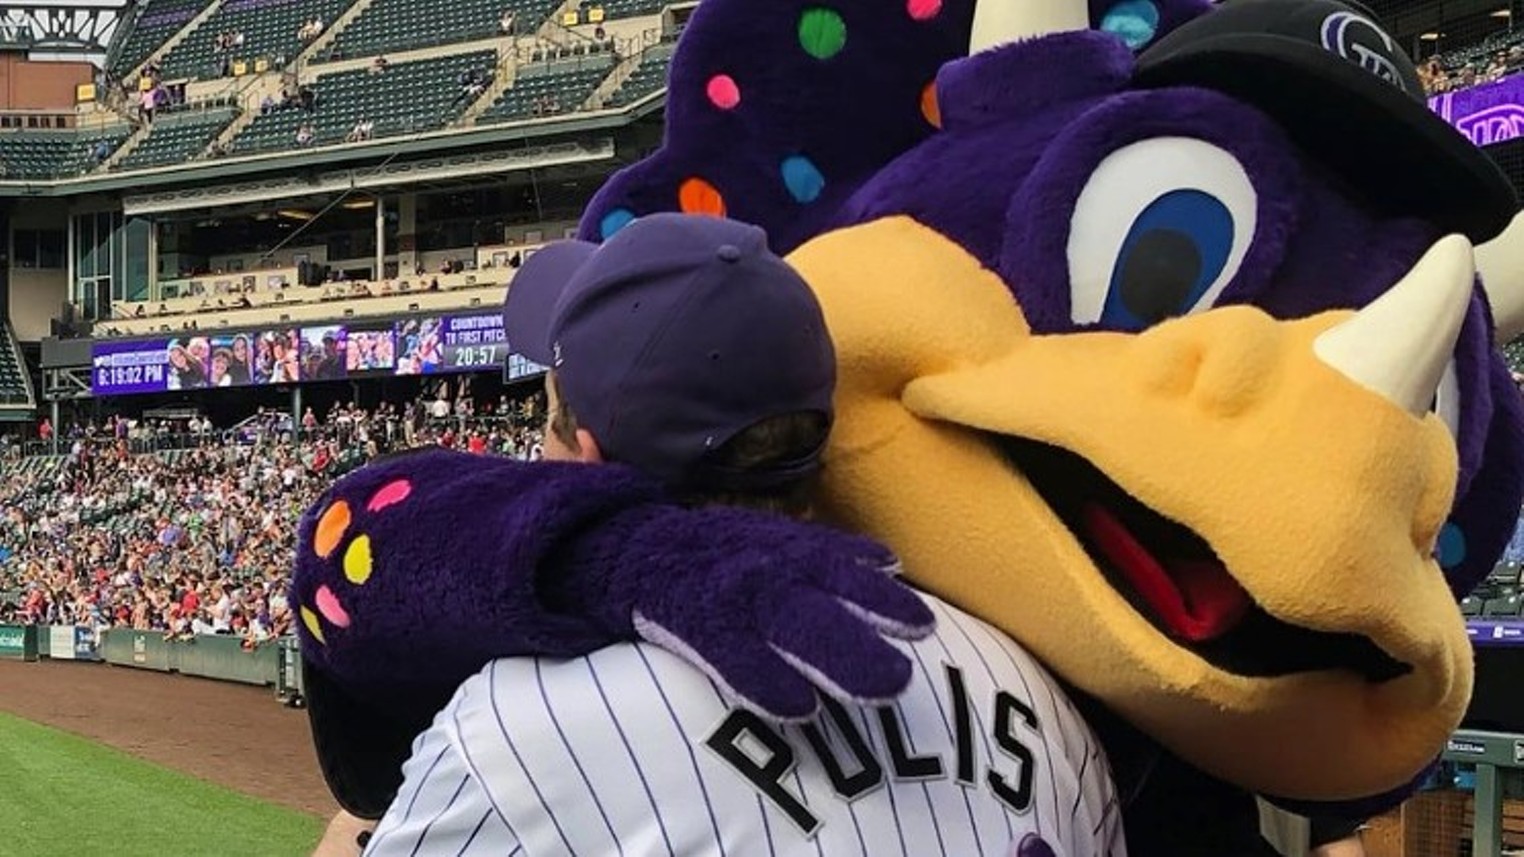 Dinger Is a Real Dinosaur of a Sports Mascot, Readers Say